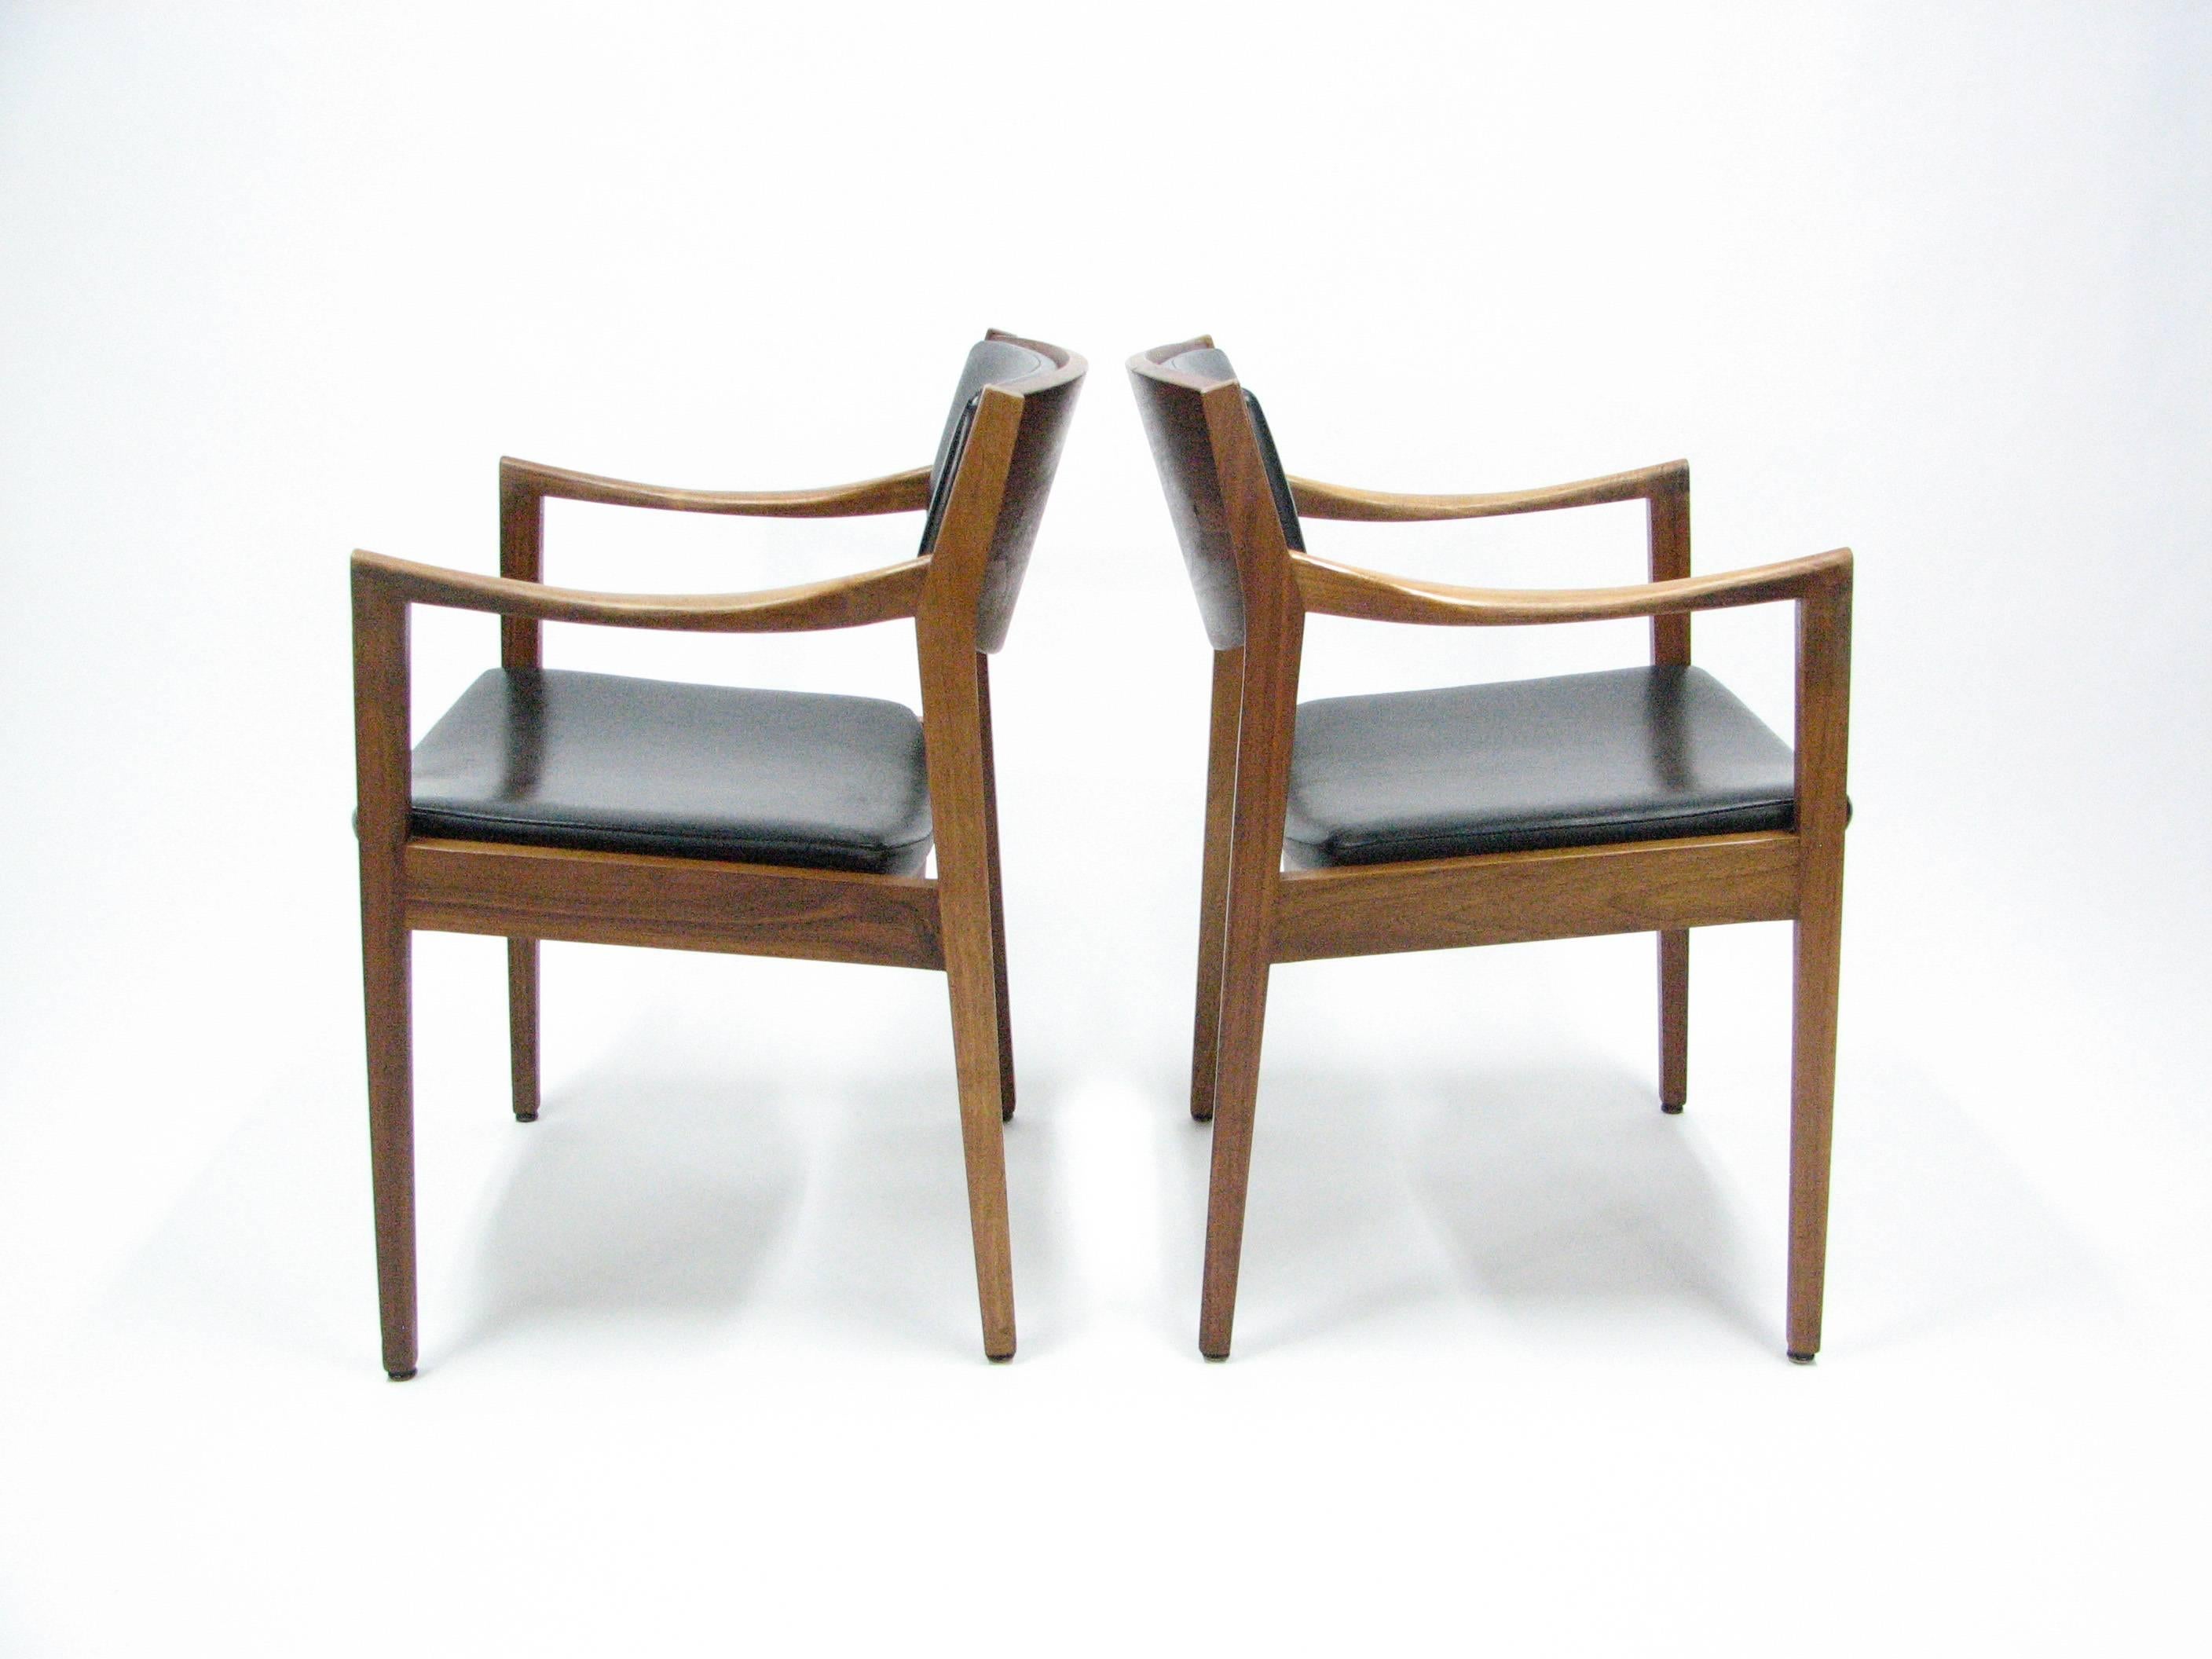 American Pair of Classic Mid-Century Gunlocke Chairs in the Manner of Jens Risom